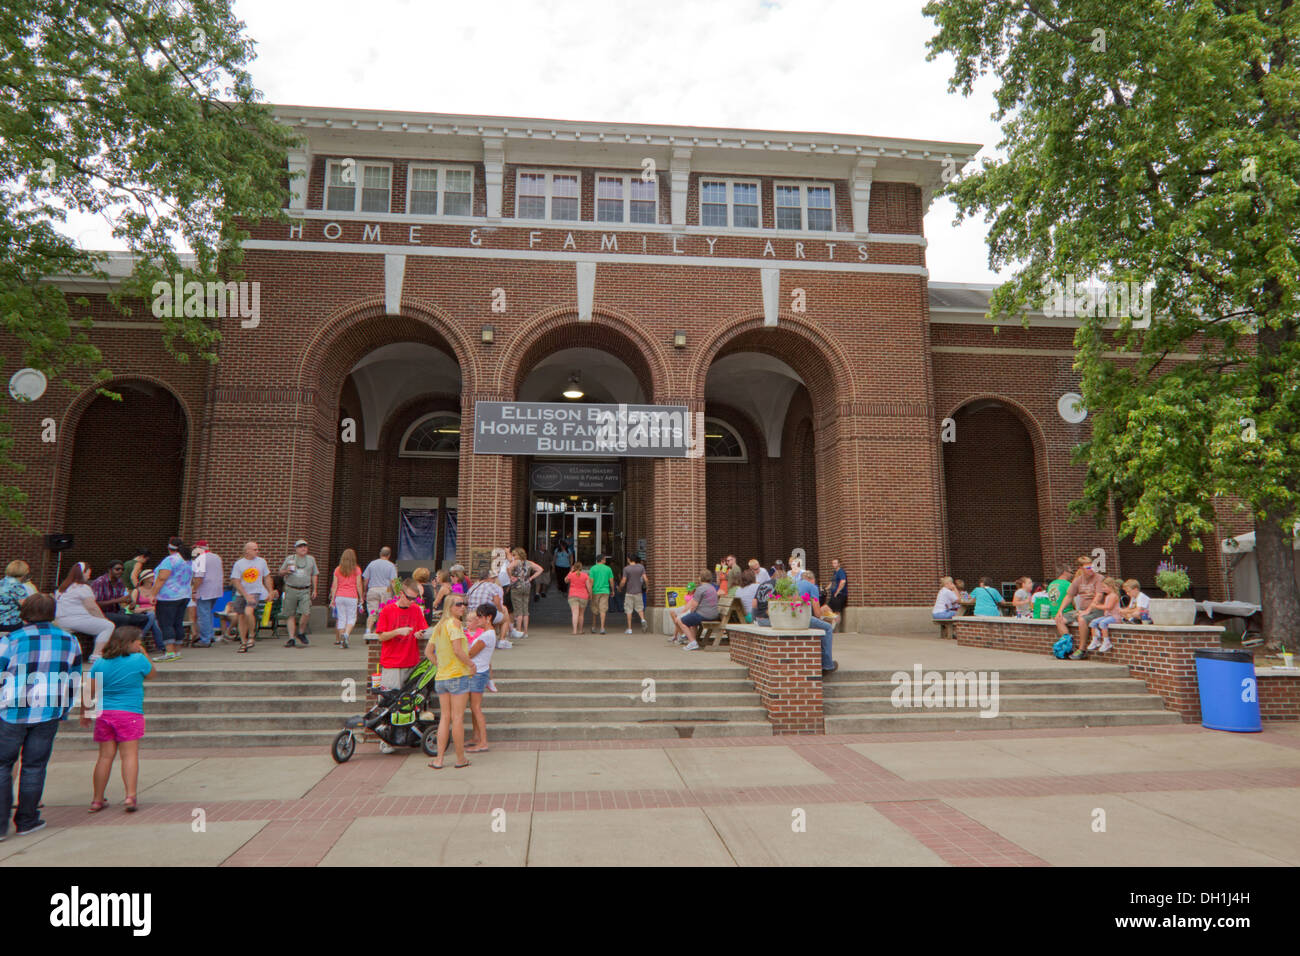 Tourists in front of the Home and Family Arts building on the   Indiana State Fairgrounds in Indianapolis Stock Photo